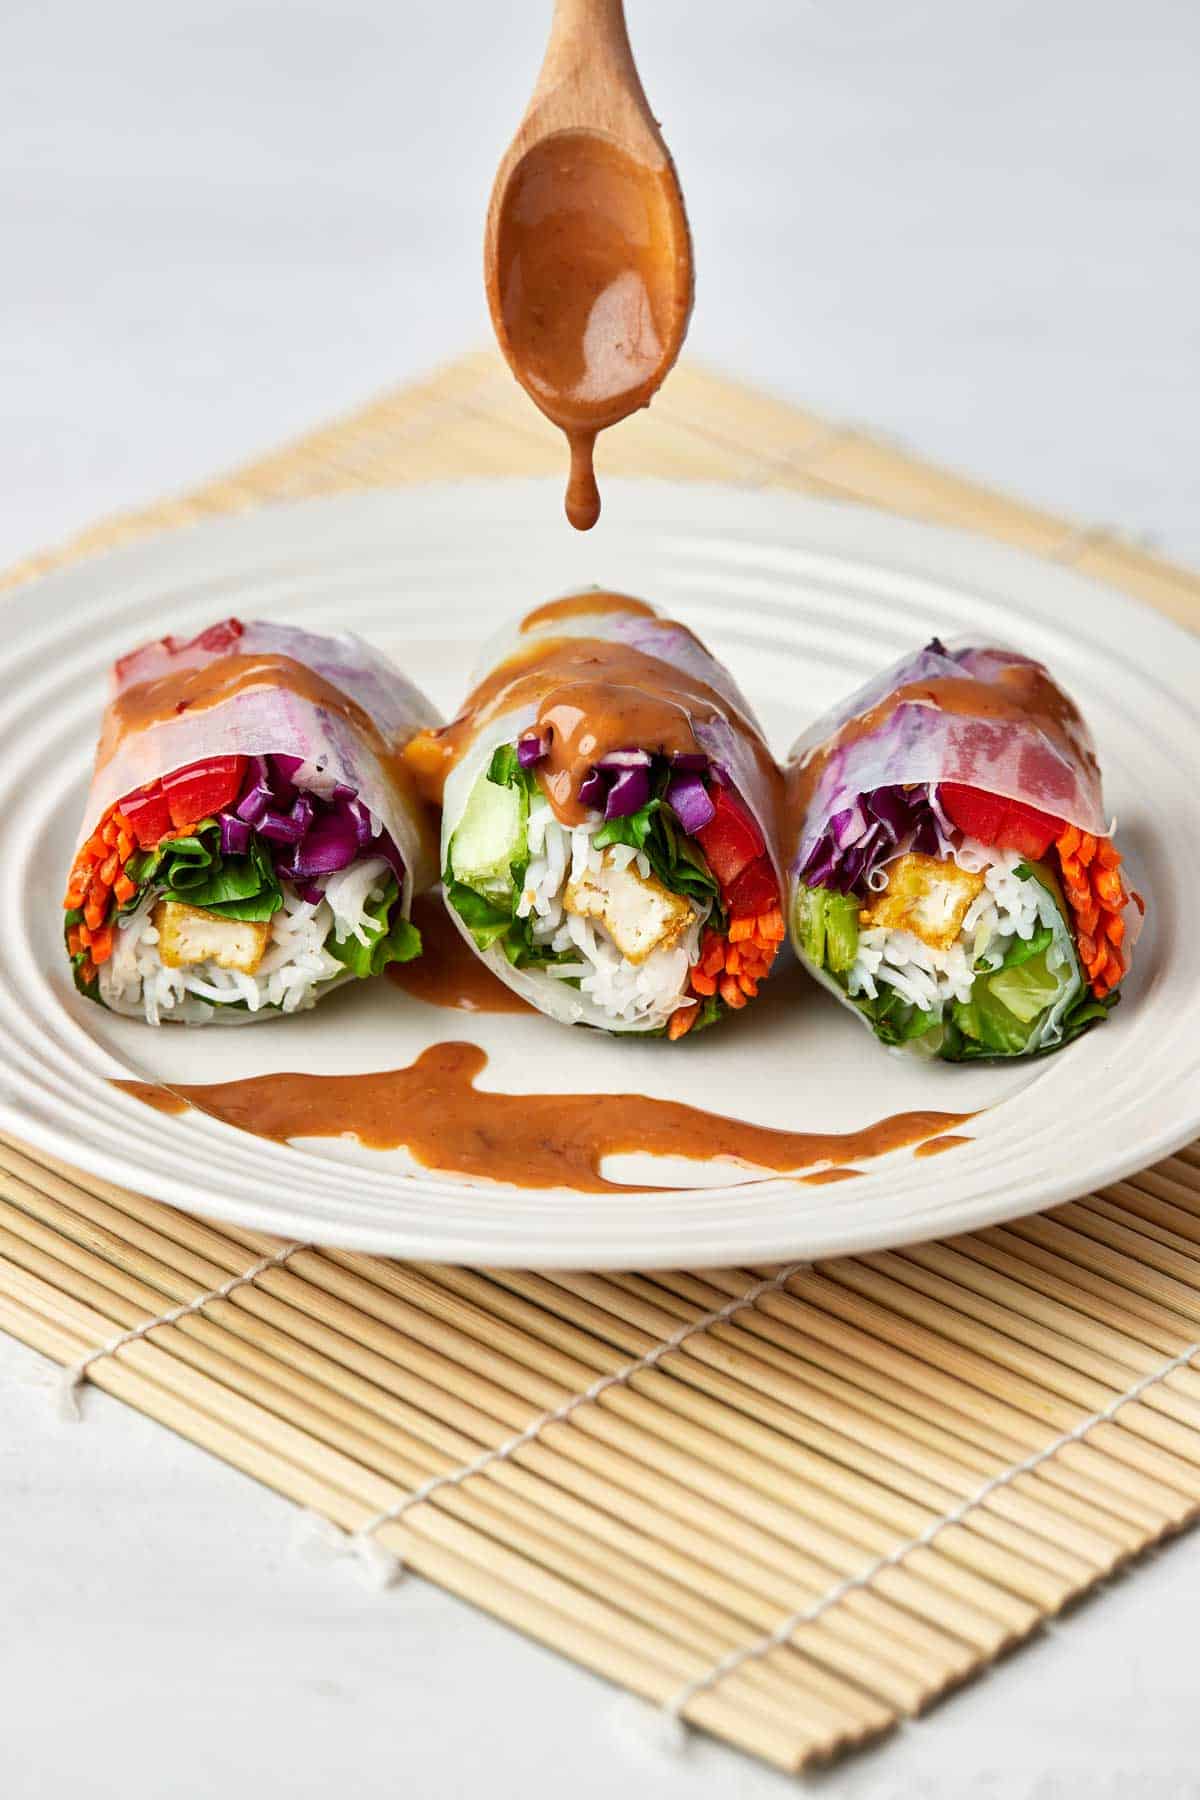 Spring rolls drizzled in peanut sauce.